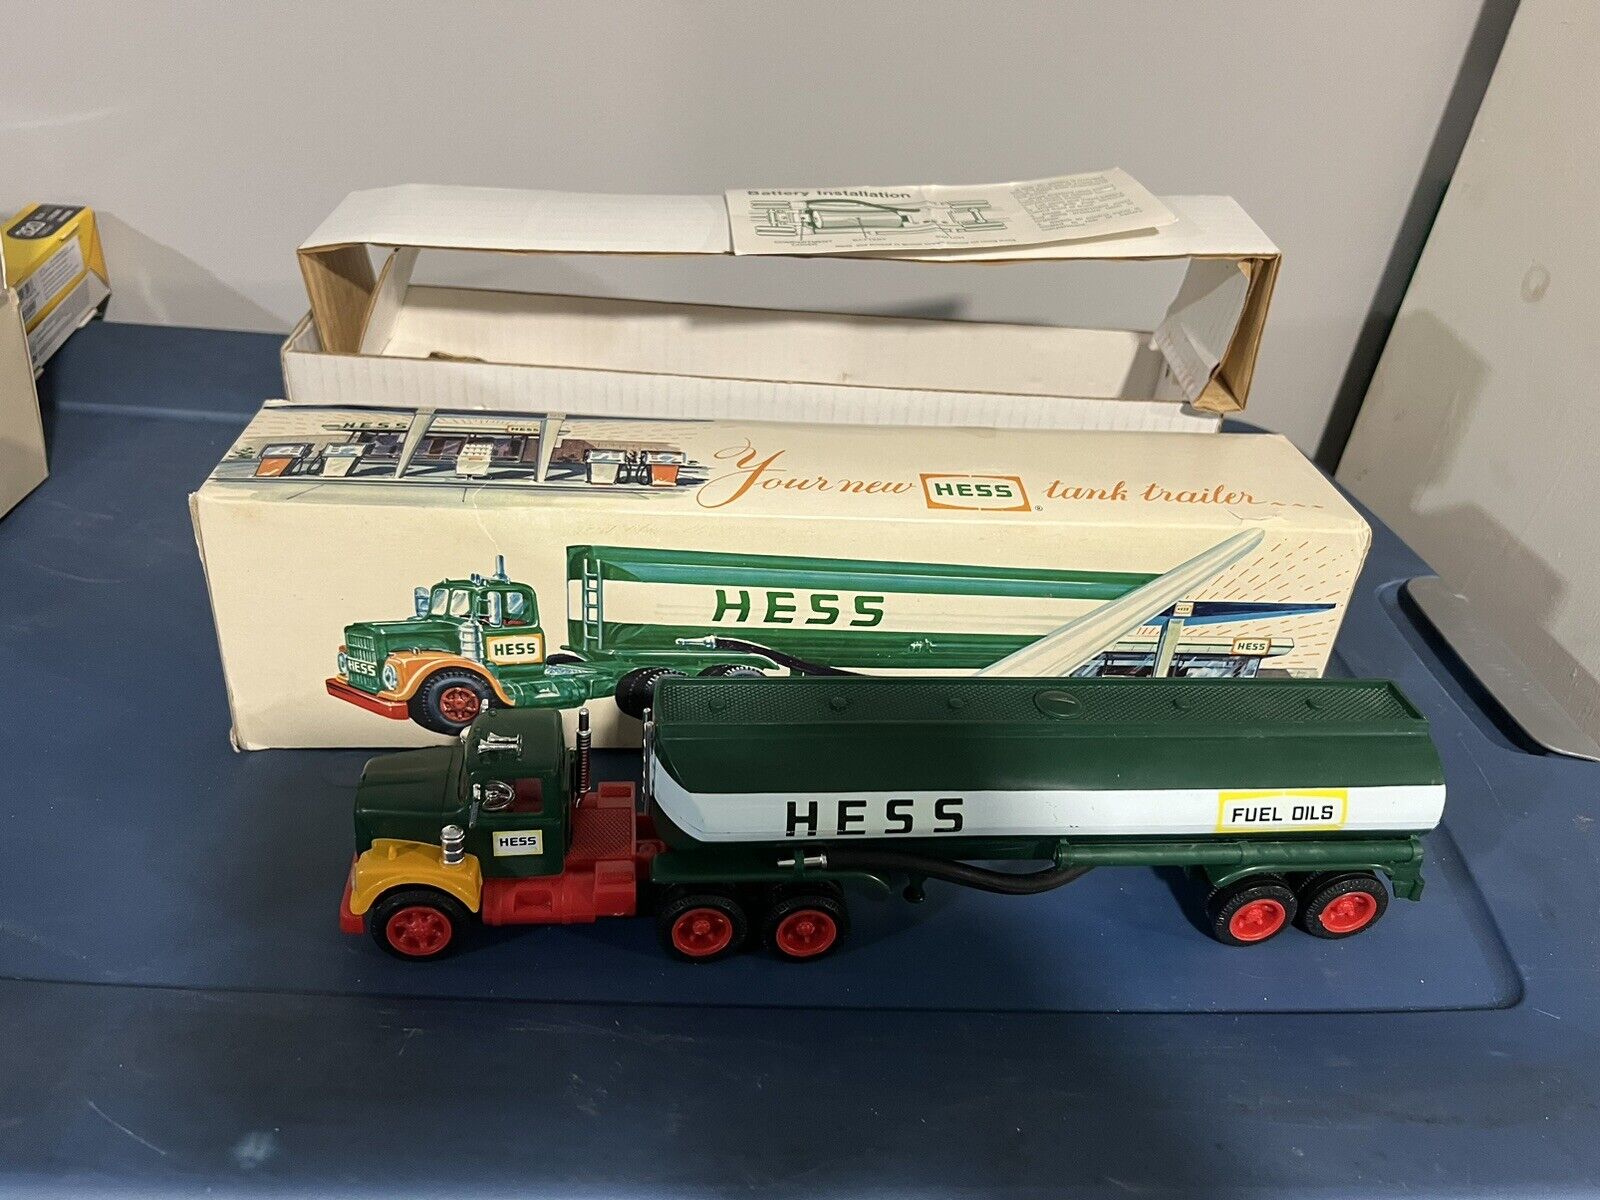 Vintage 1972-1974 HESS Toy Truck Fuel Tanker With Original Box 